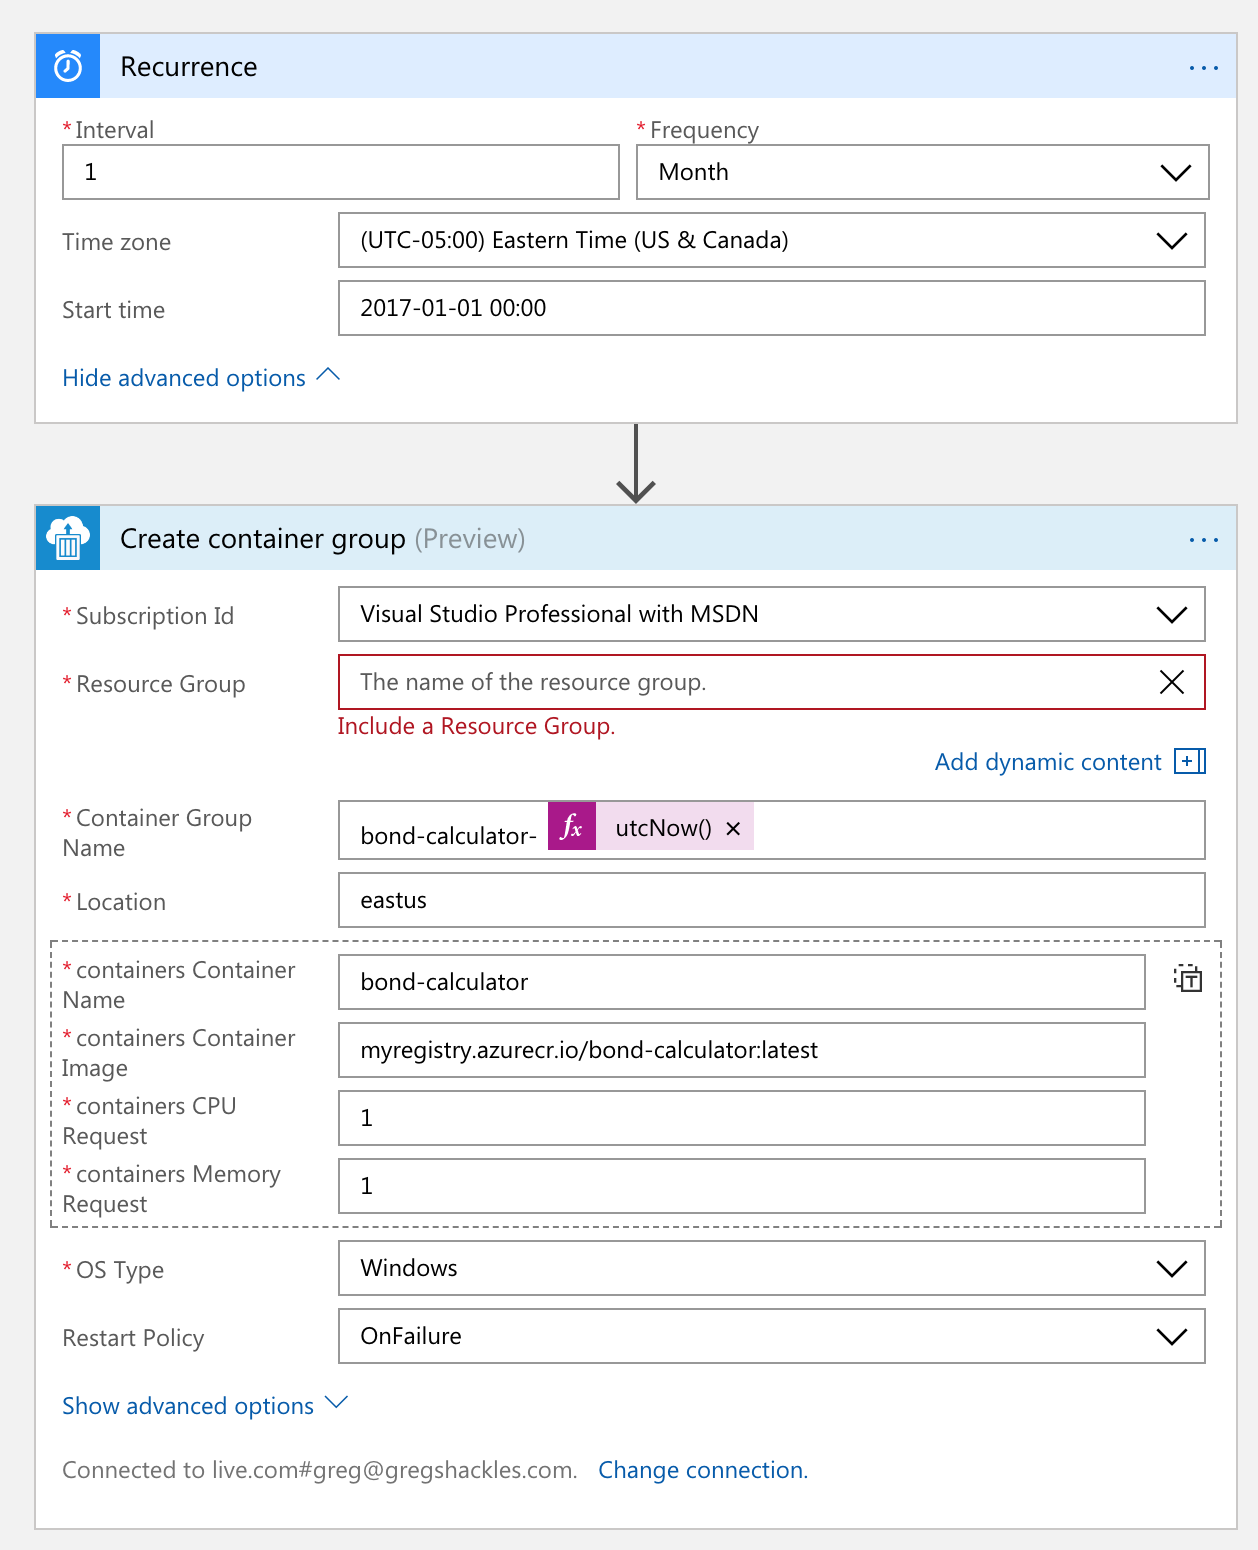 Checking Savings Bond Values with F#, Docker, and Azure